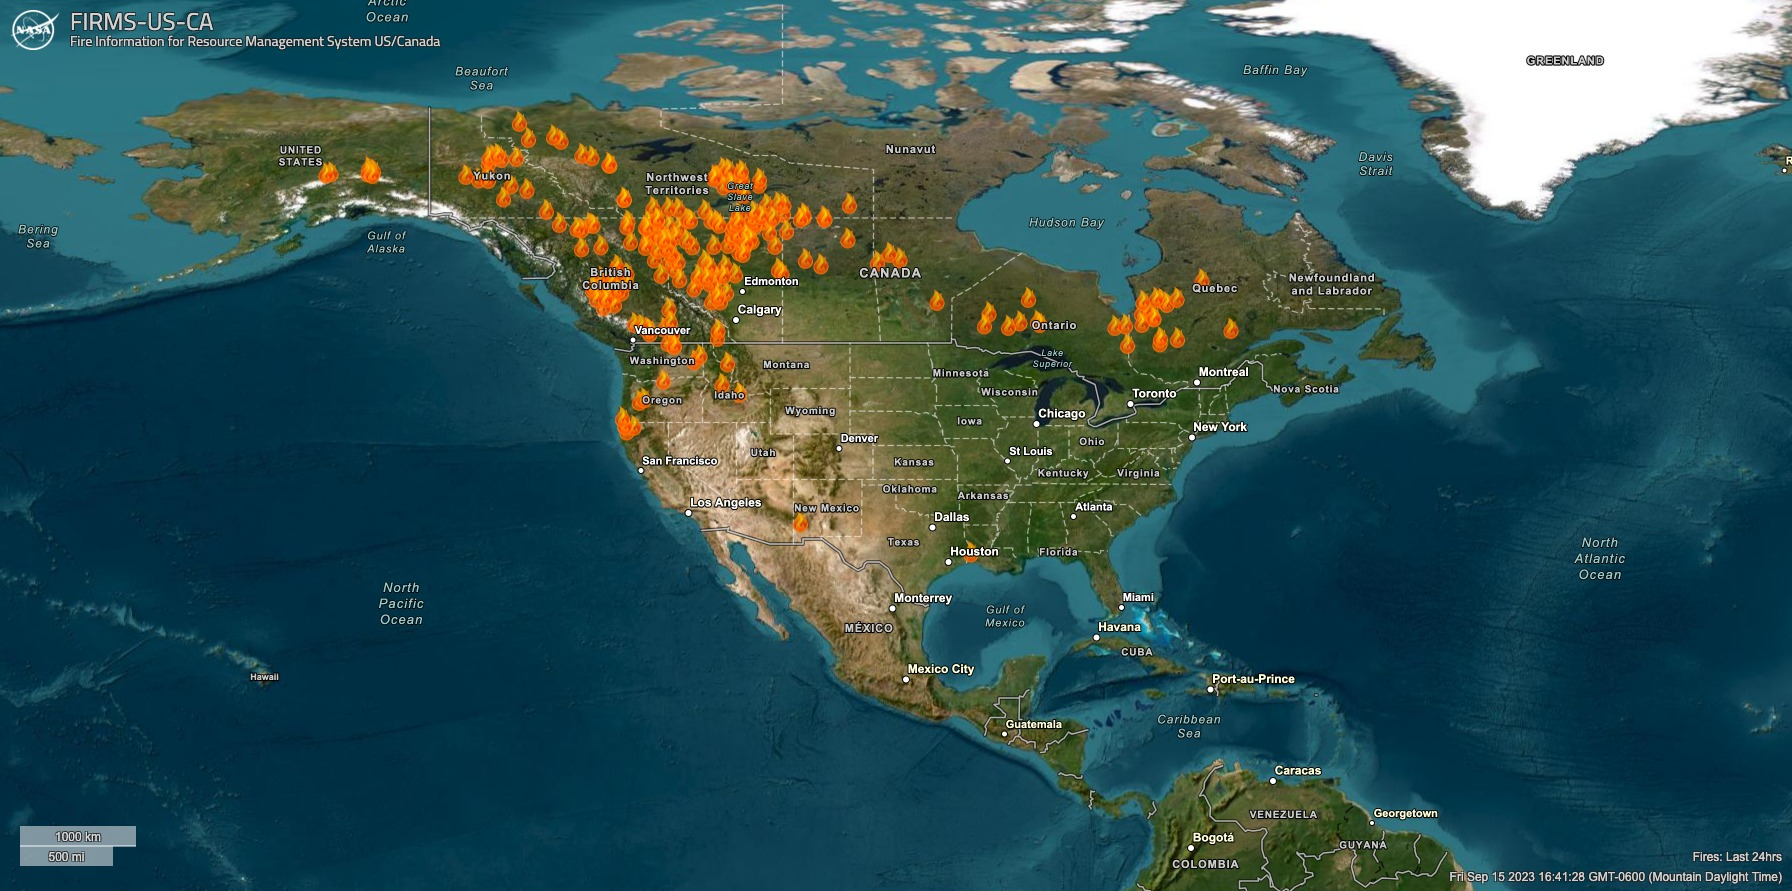 This map shows the Fire Information for Resource Management System for the US and Canada for September 16, 2023.